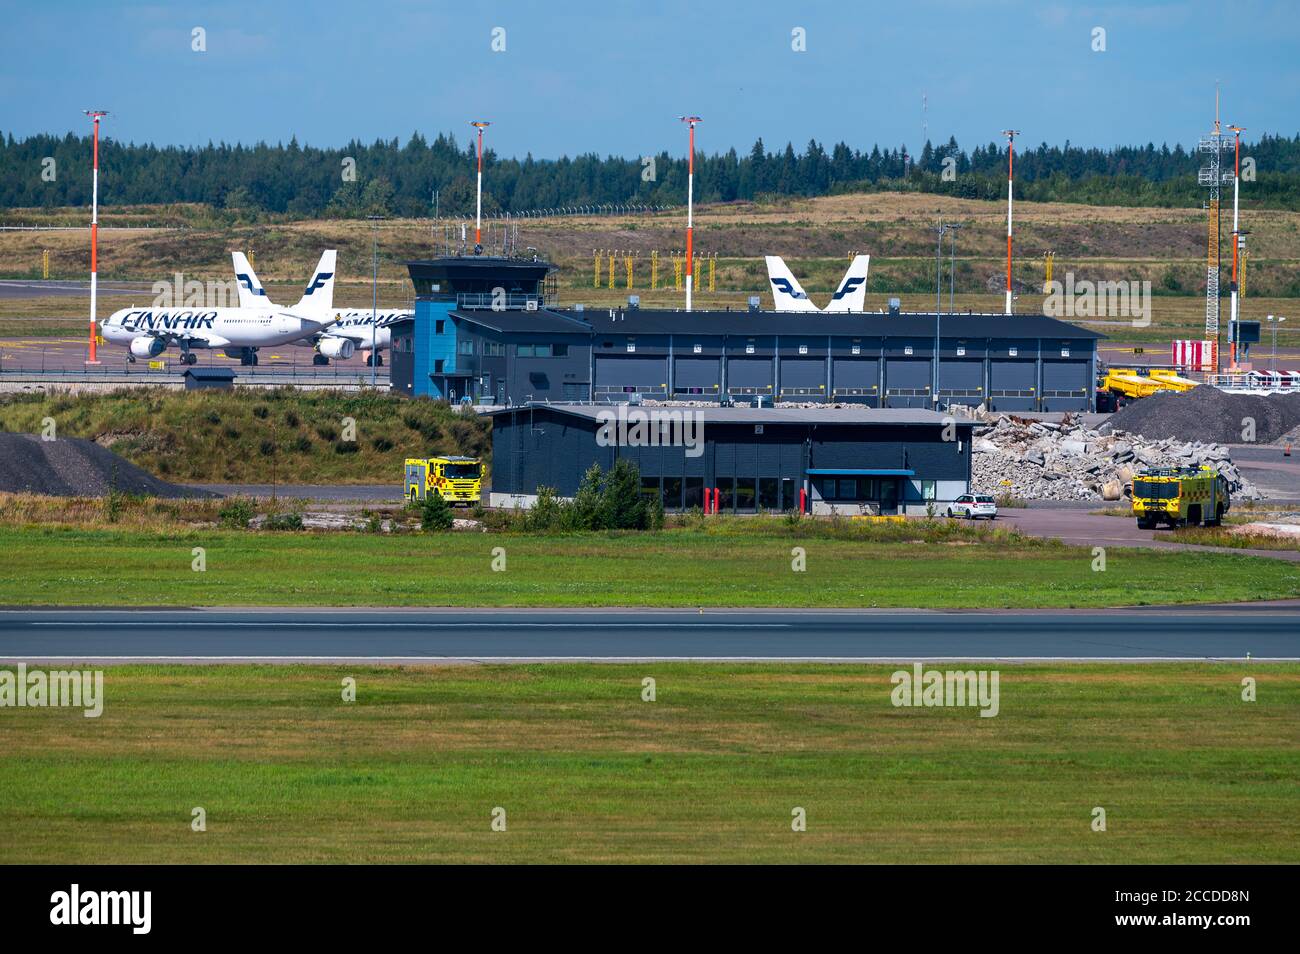 Helsinki / Finland - August 21, 2020: The busiest international airport in Finland have had only a handful of airside operations during covid-19 pande Stock Photo